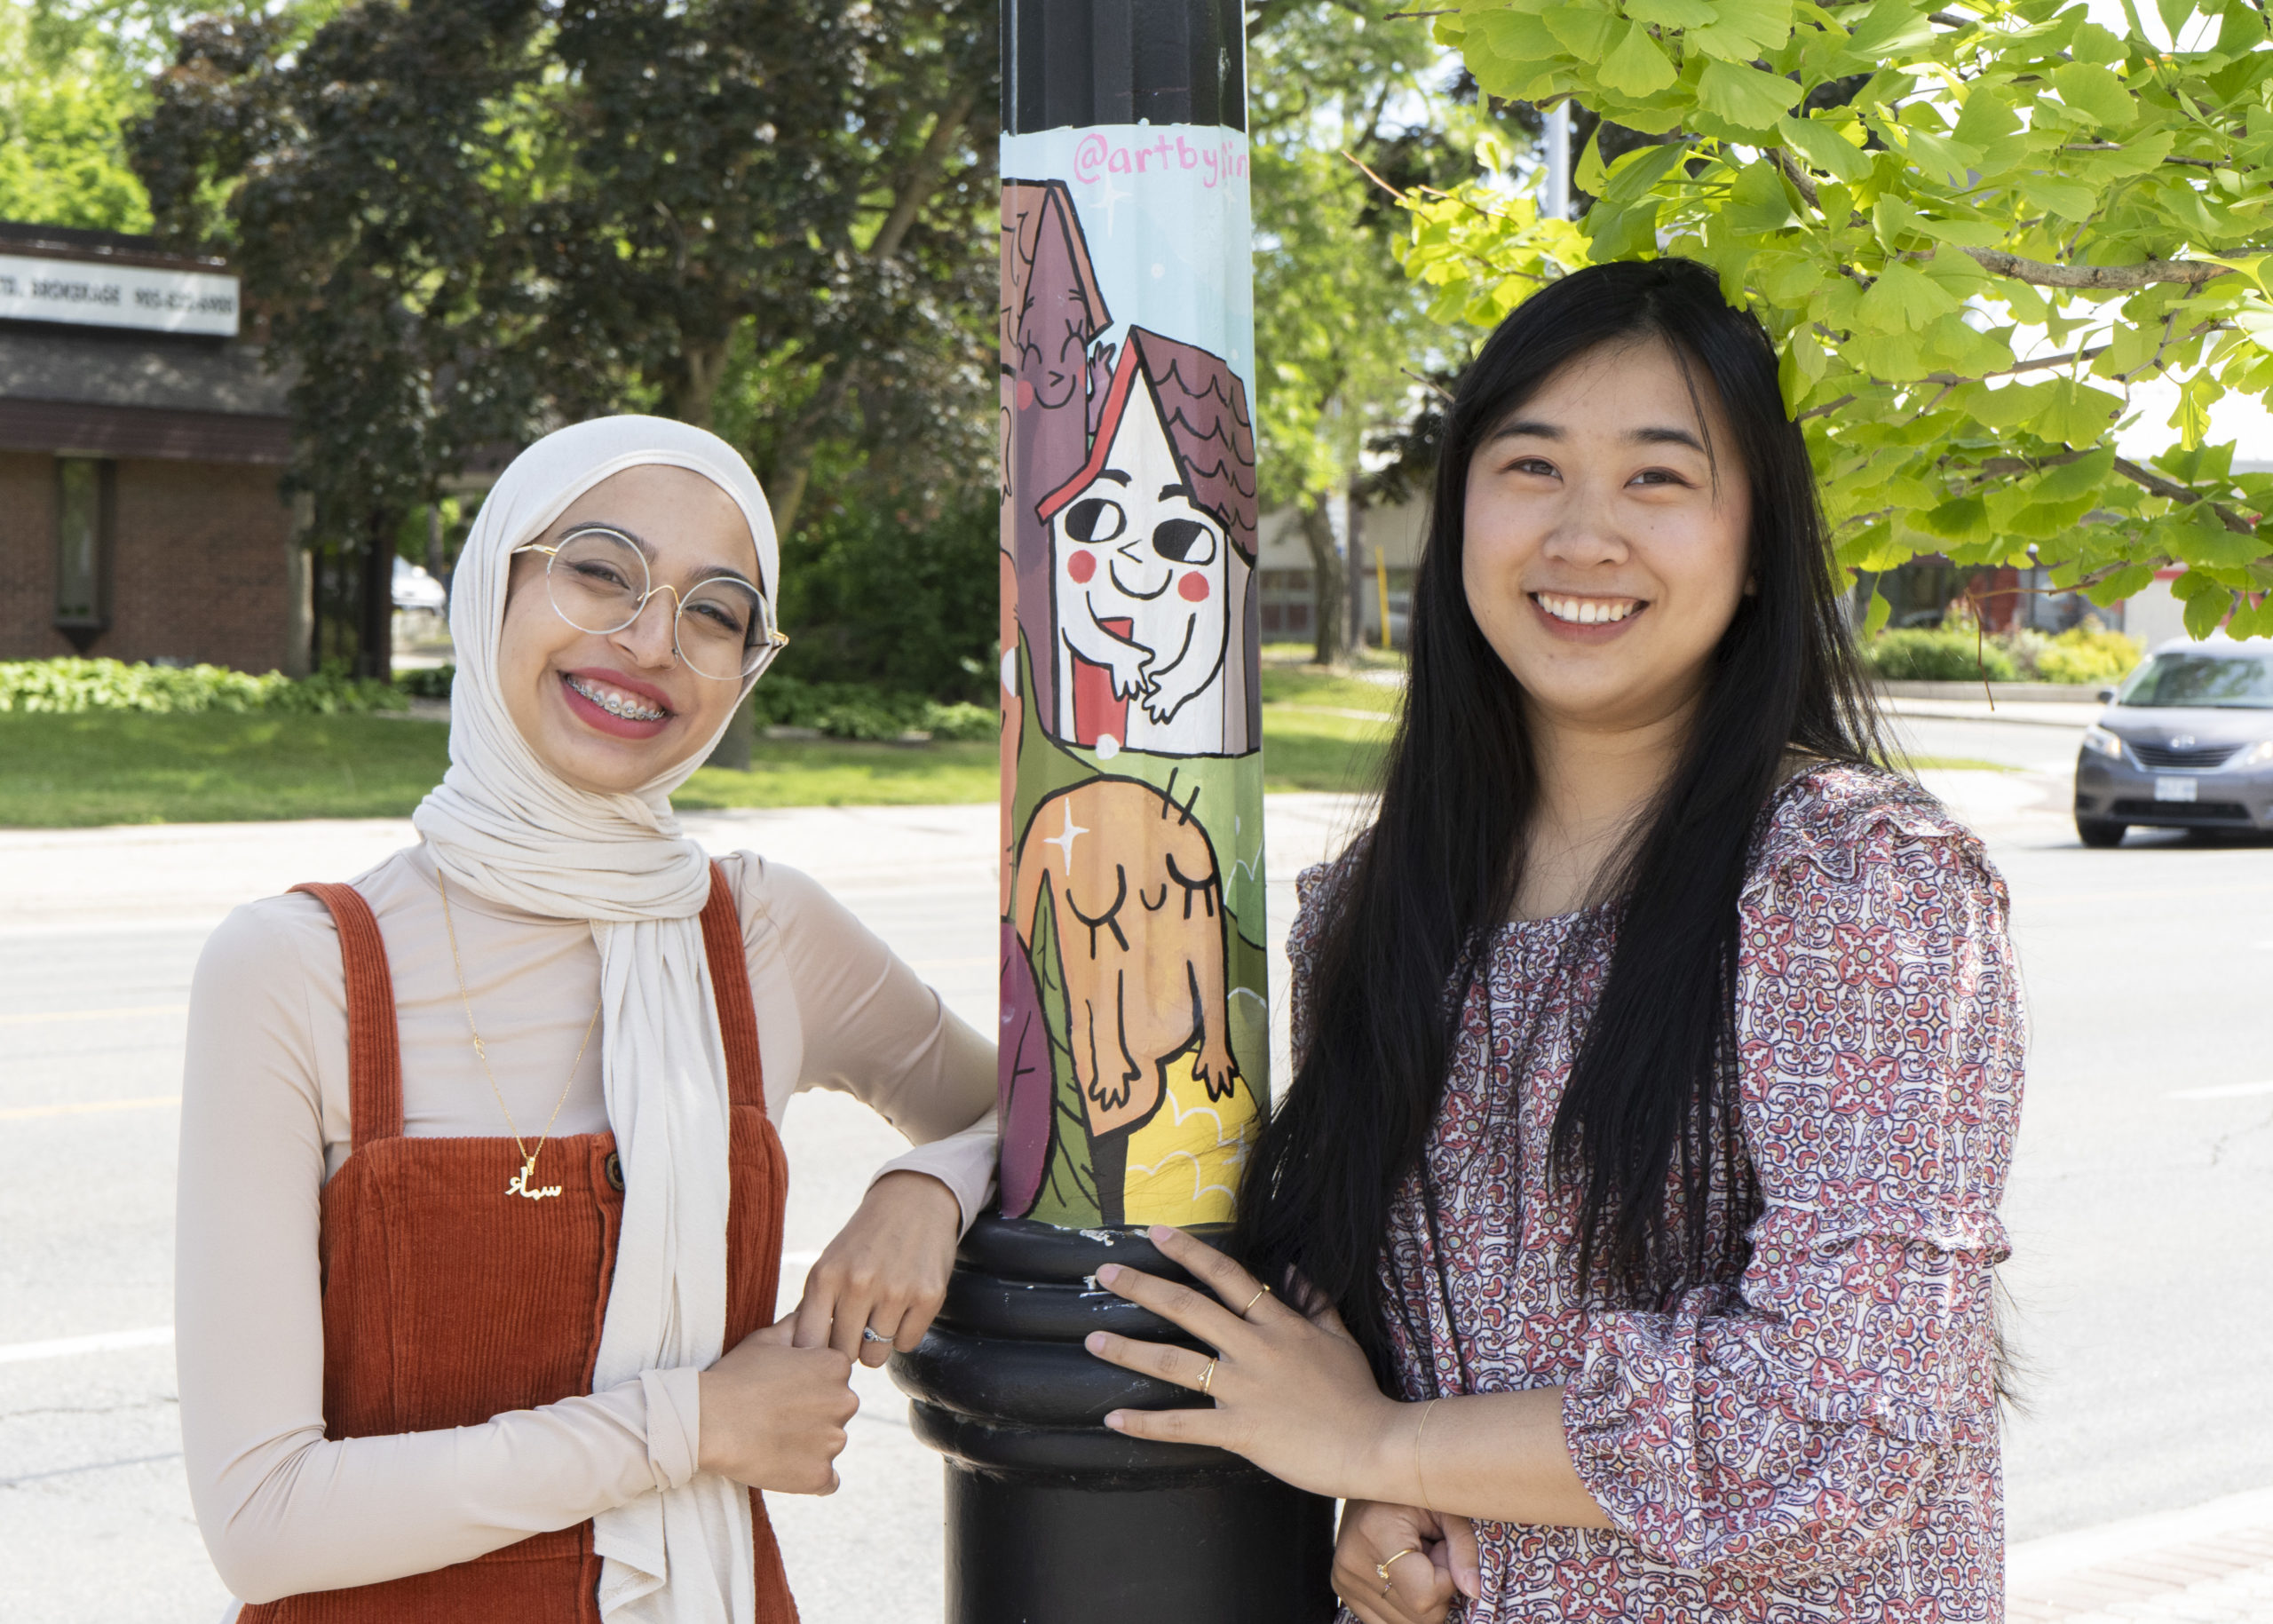 Artists Sima Naseem and Yen Linh Thai posing beside a painted public art mural on a street pole in Clarkson Village, Mississauga